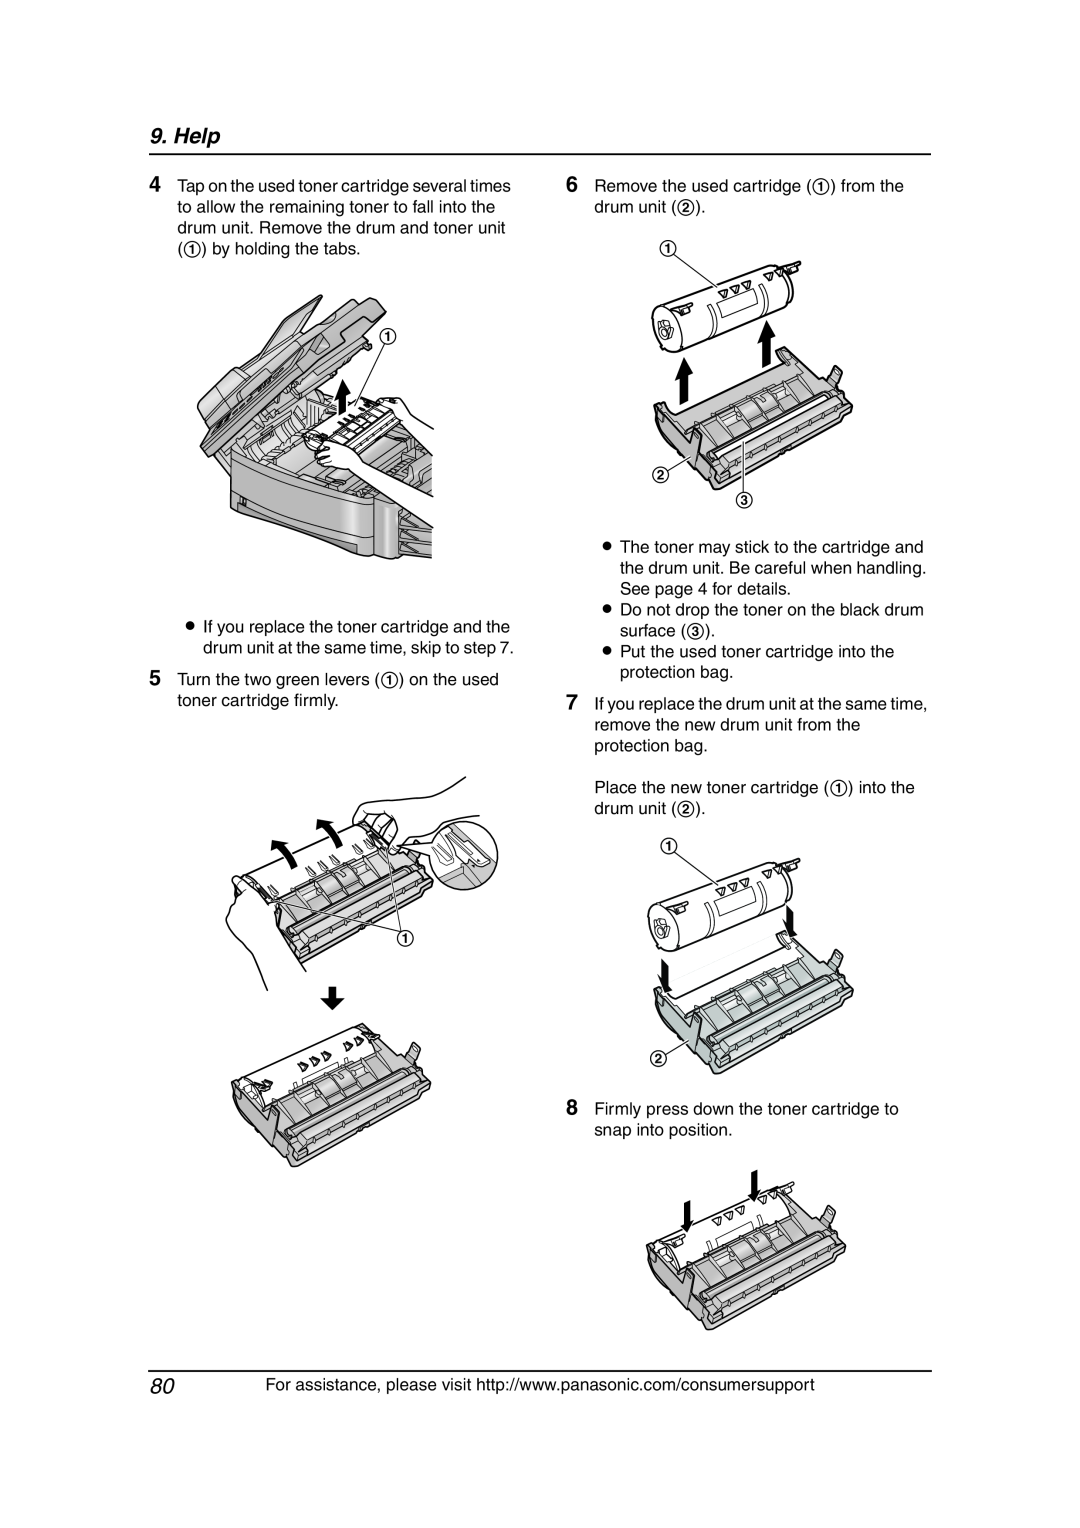 Panasonic KX-FLB851 manual Help, Turn the two green levers 1 on the used toner cartridge firmly 